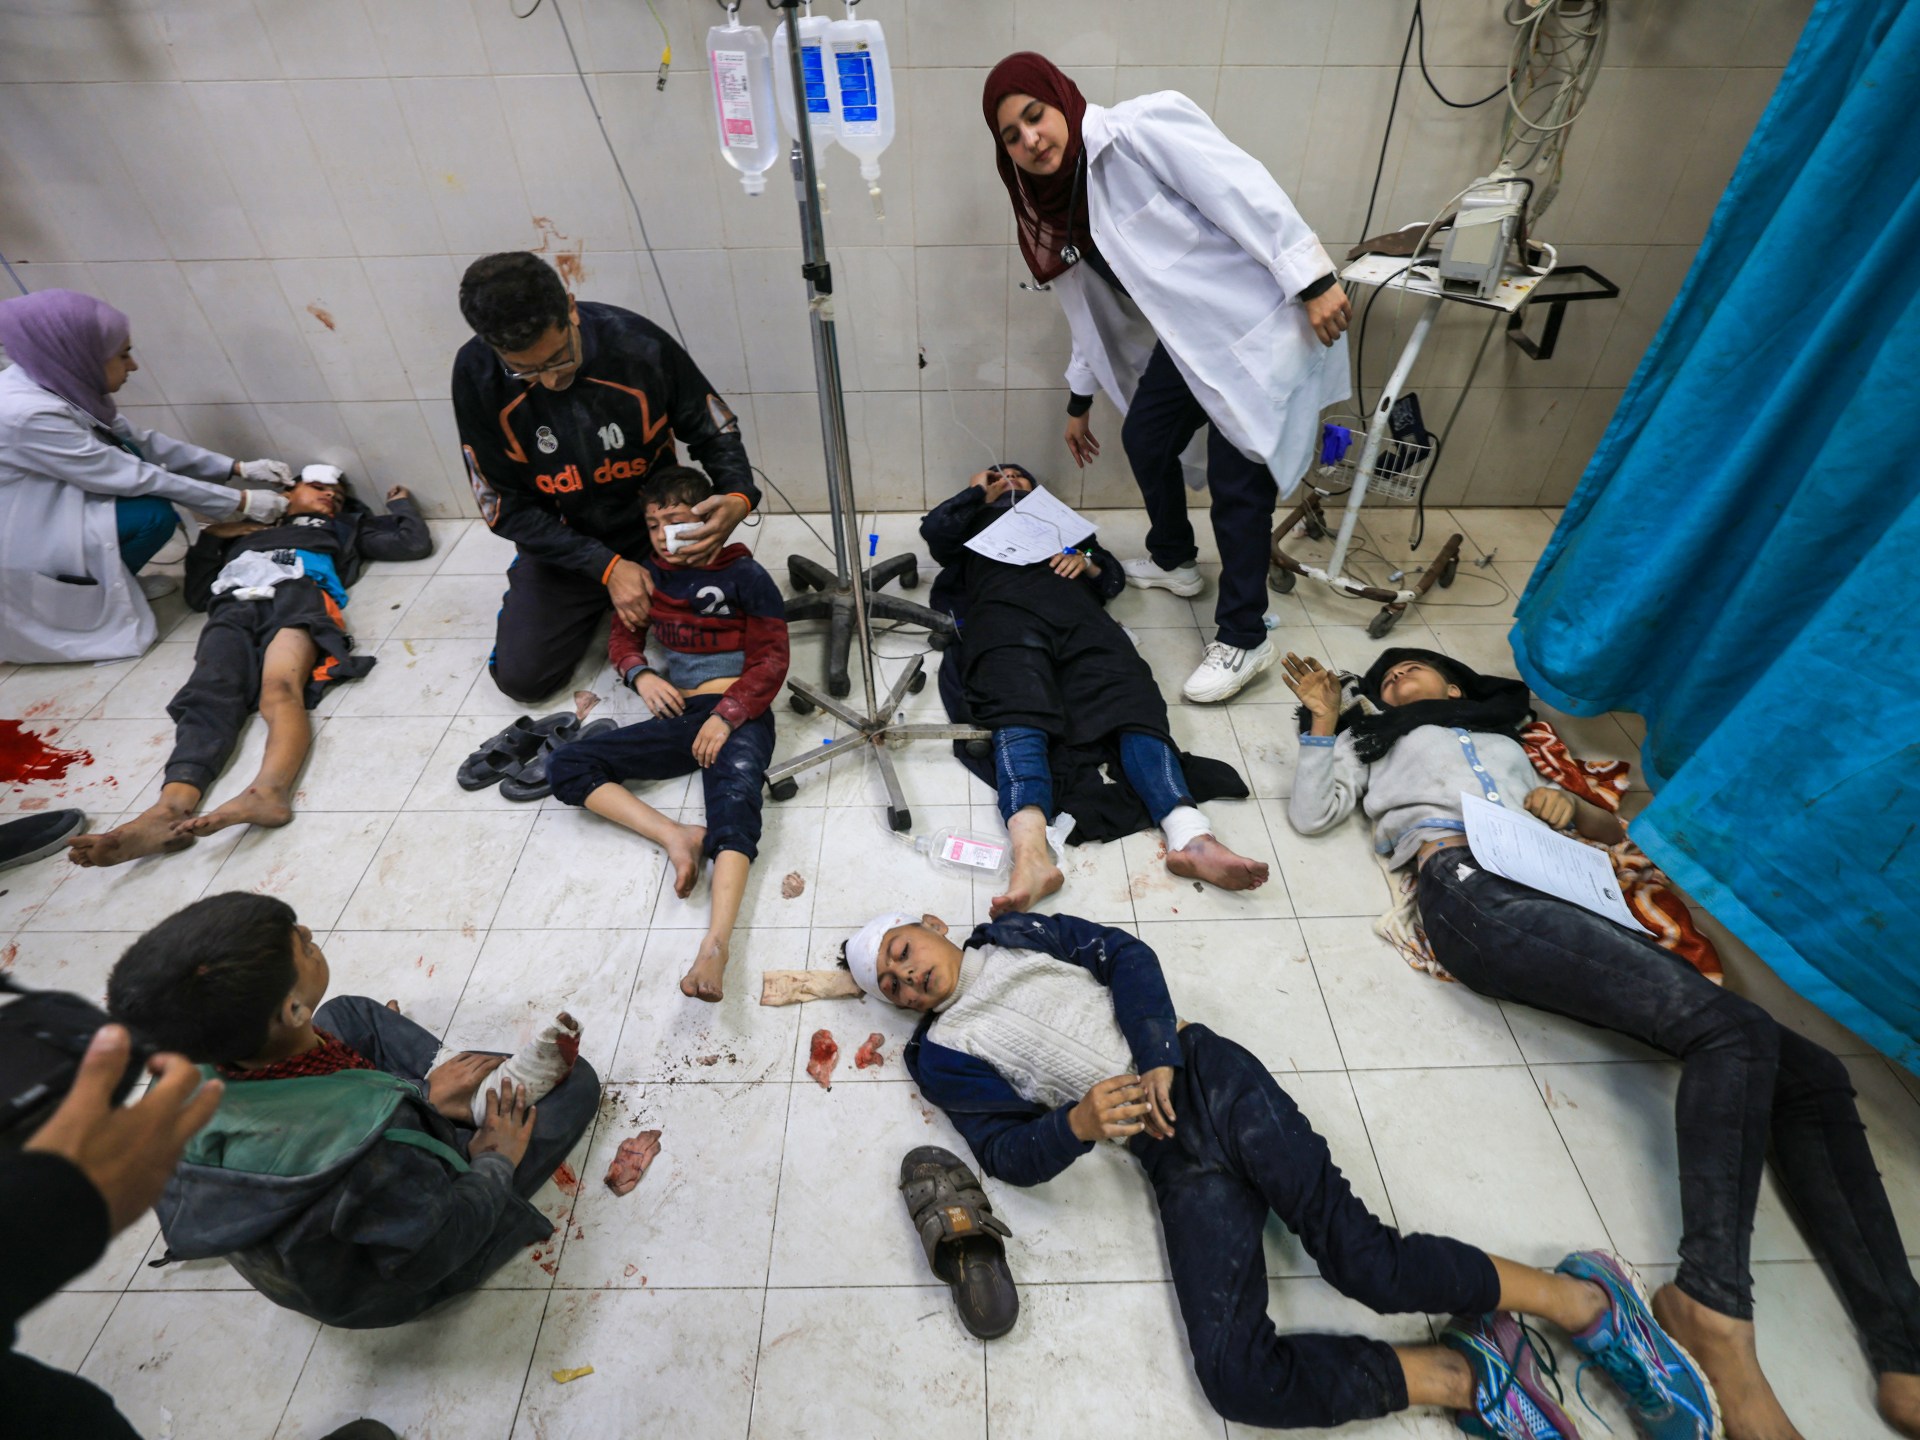 ‘We have a duty’: US doctor says ceasefire an ‘ethical imperative’ in Gaza | News